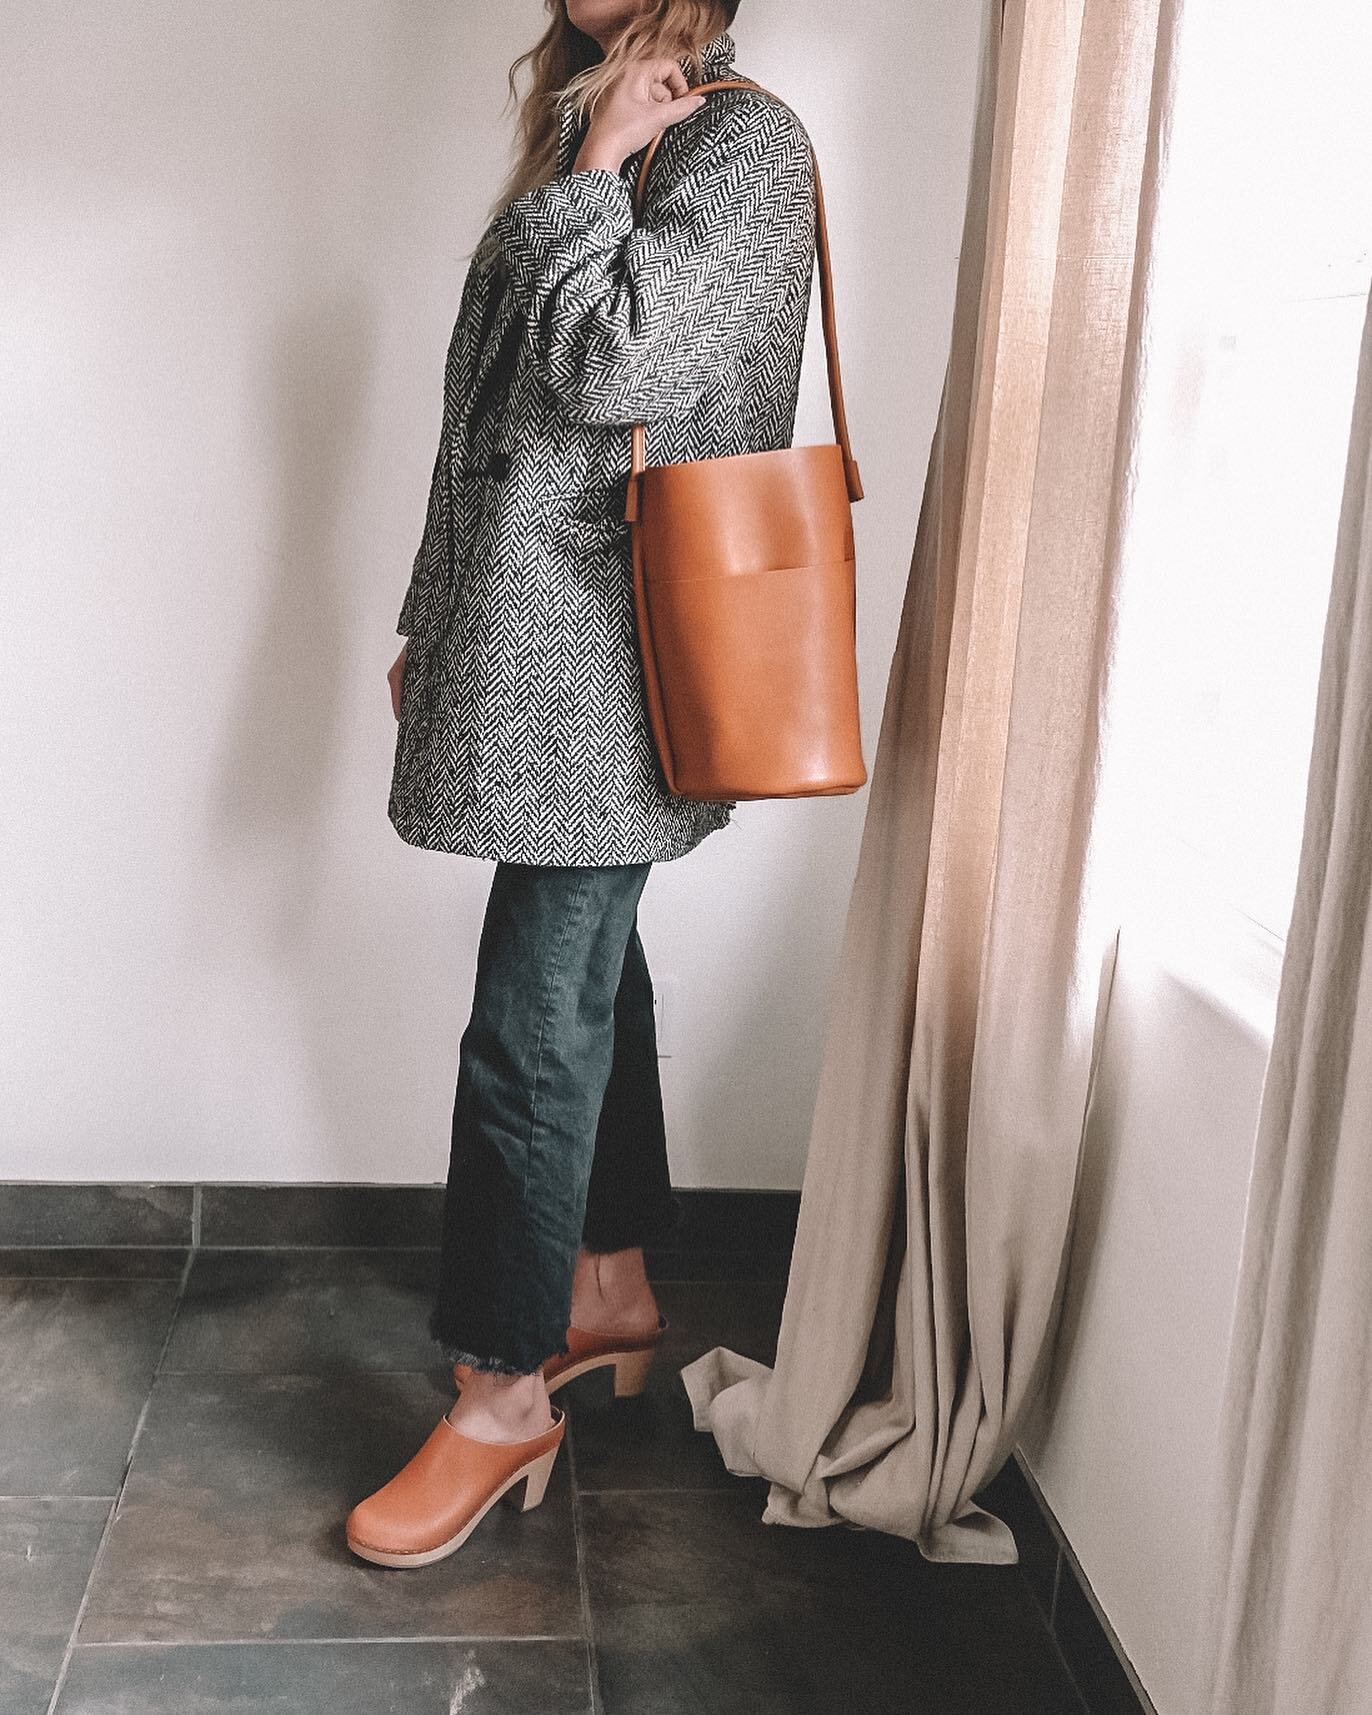 Charles Eames // &ldquo;The most important thing is that you love what you are doing, and the second that you are not afraid of where your next idea will lead.&rdquo;

#tuesdayquotes 
#modernbucketbag